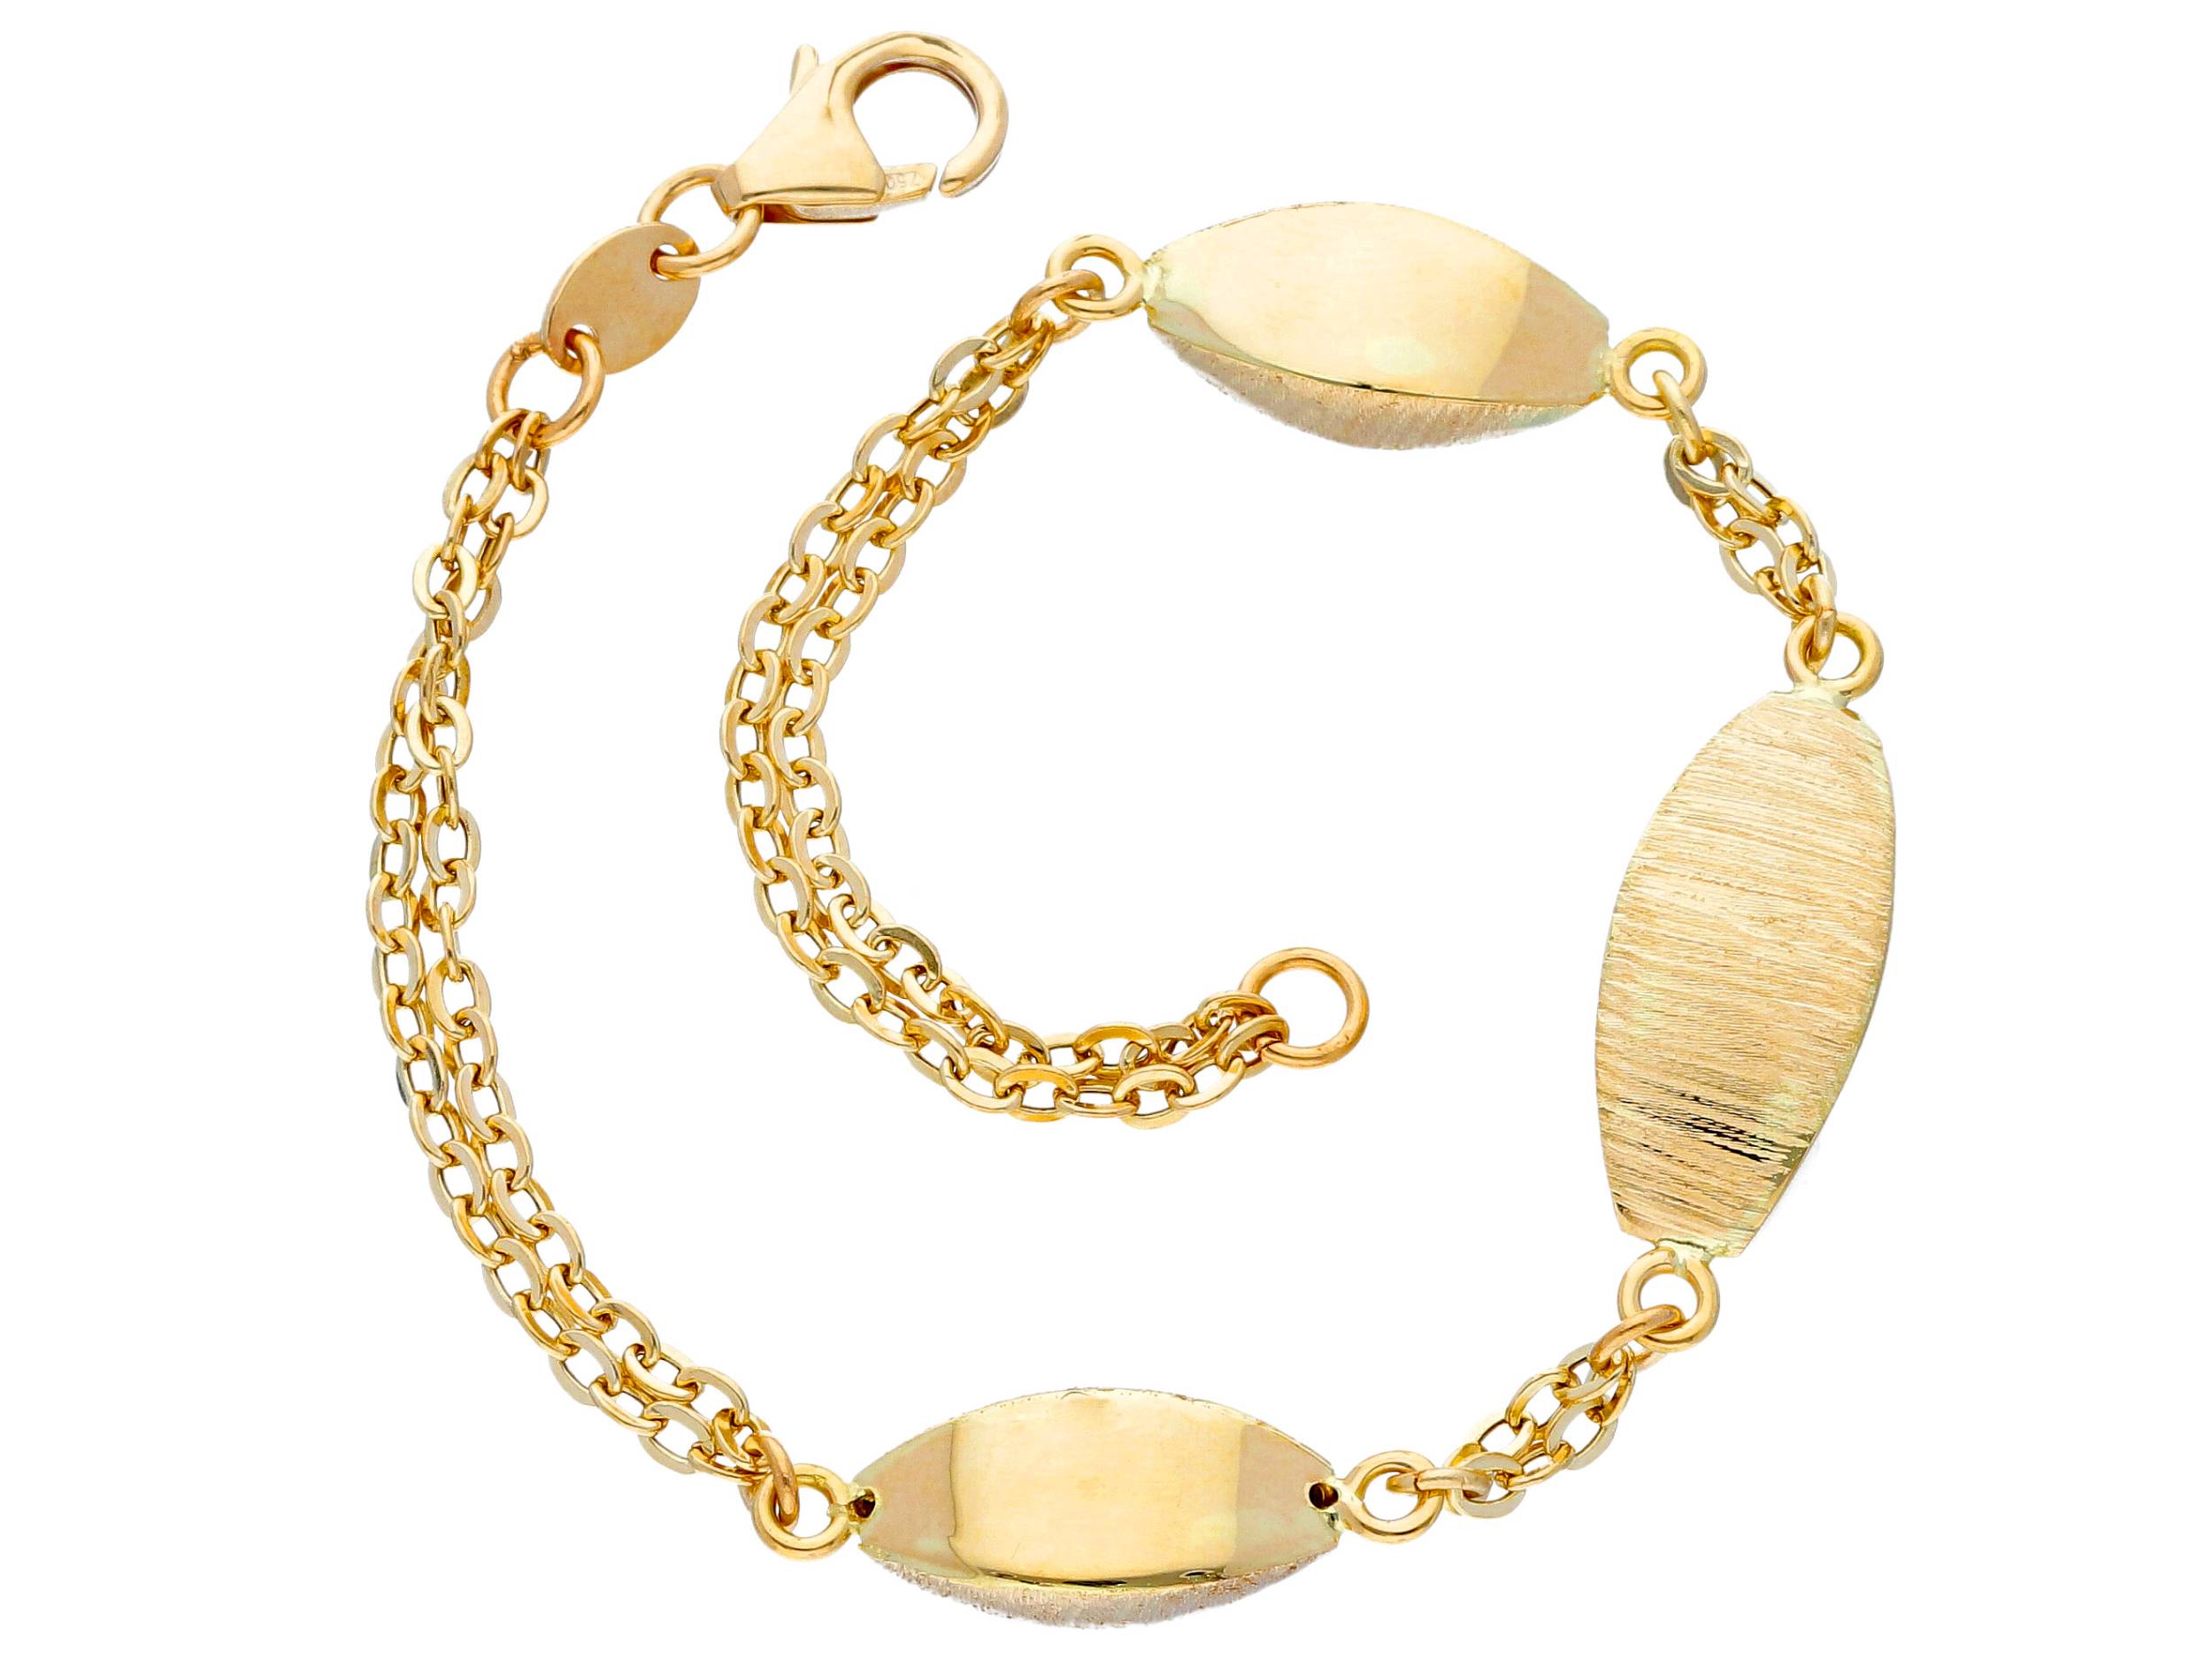 Beautiful 18ct Yellow Gold Bracelet With Elements